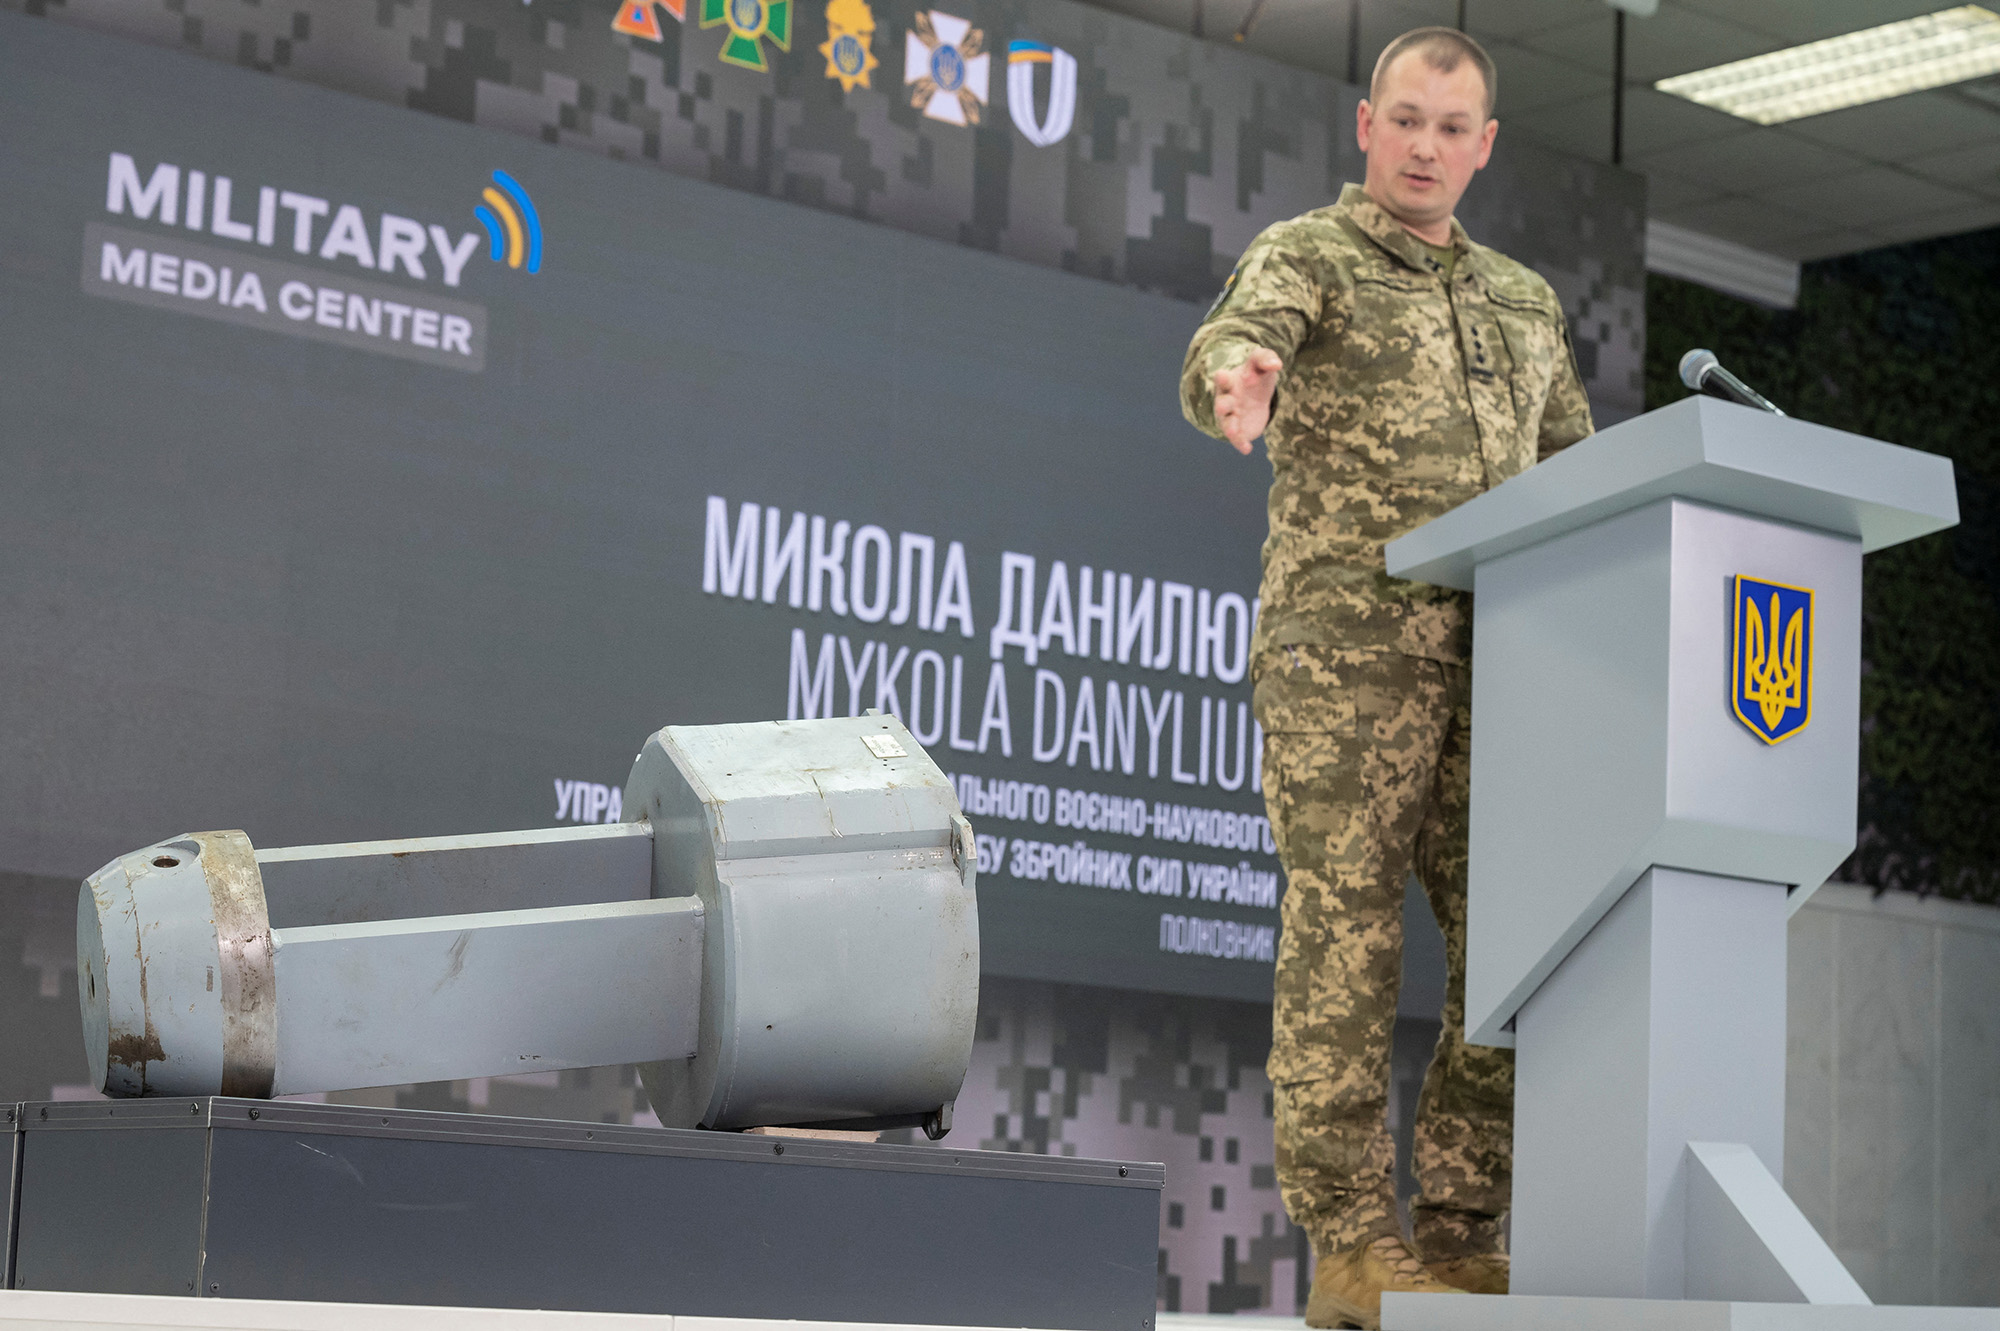 Colonel Mykola Danyliuk points at a dud warhead imitating a nuclear part of a Kh-55SM strategic cruise missile, during a news conference in Kyiv, Ukraine, on December 1.